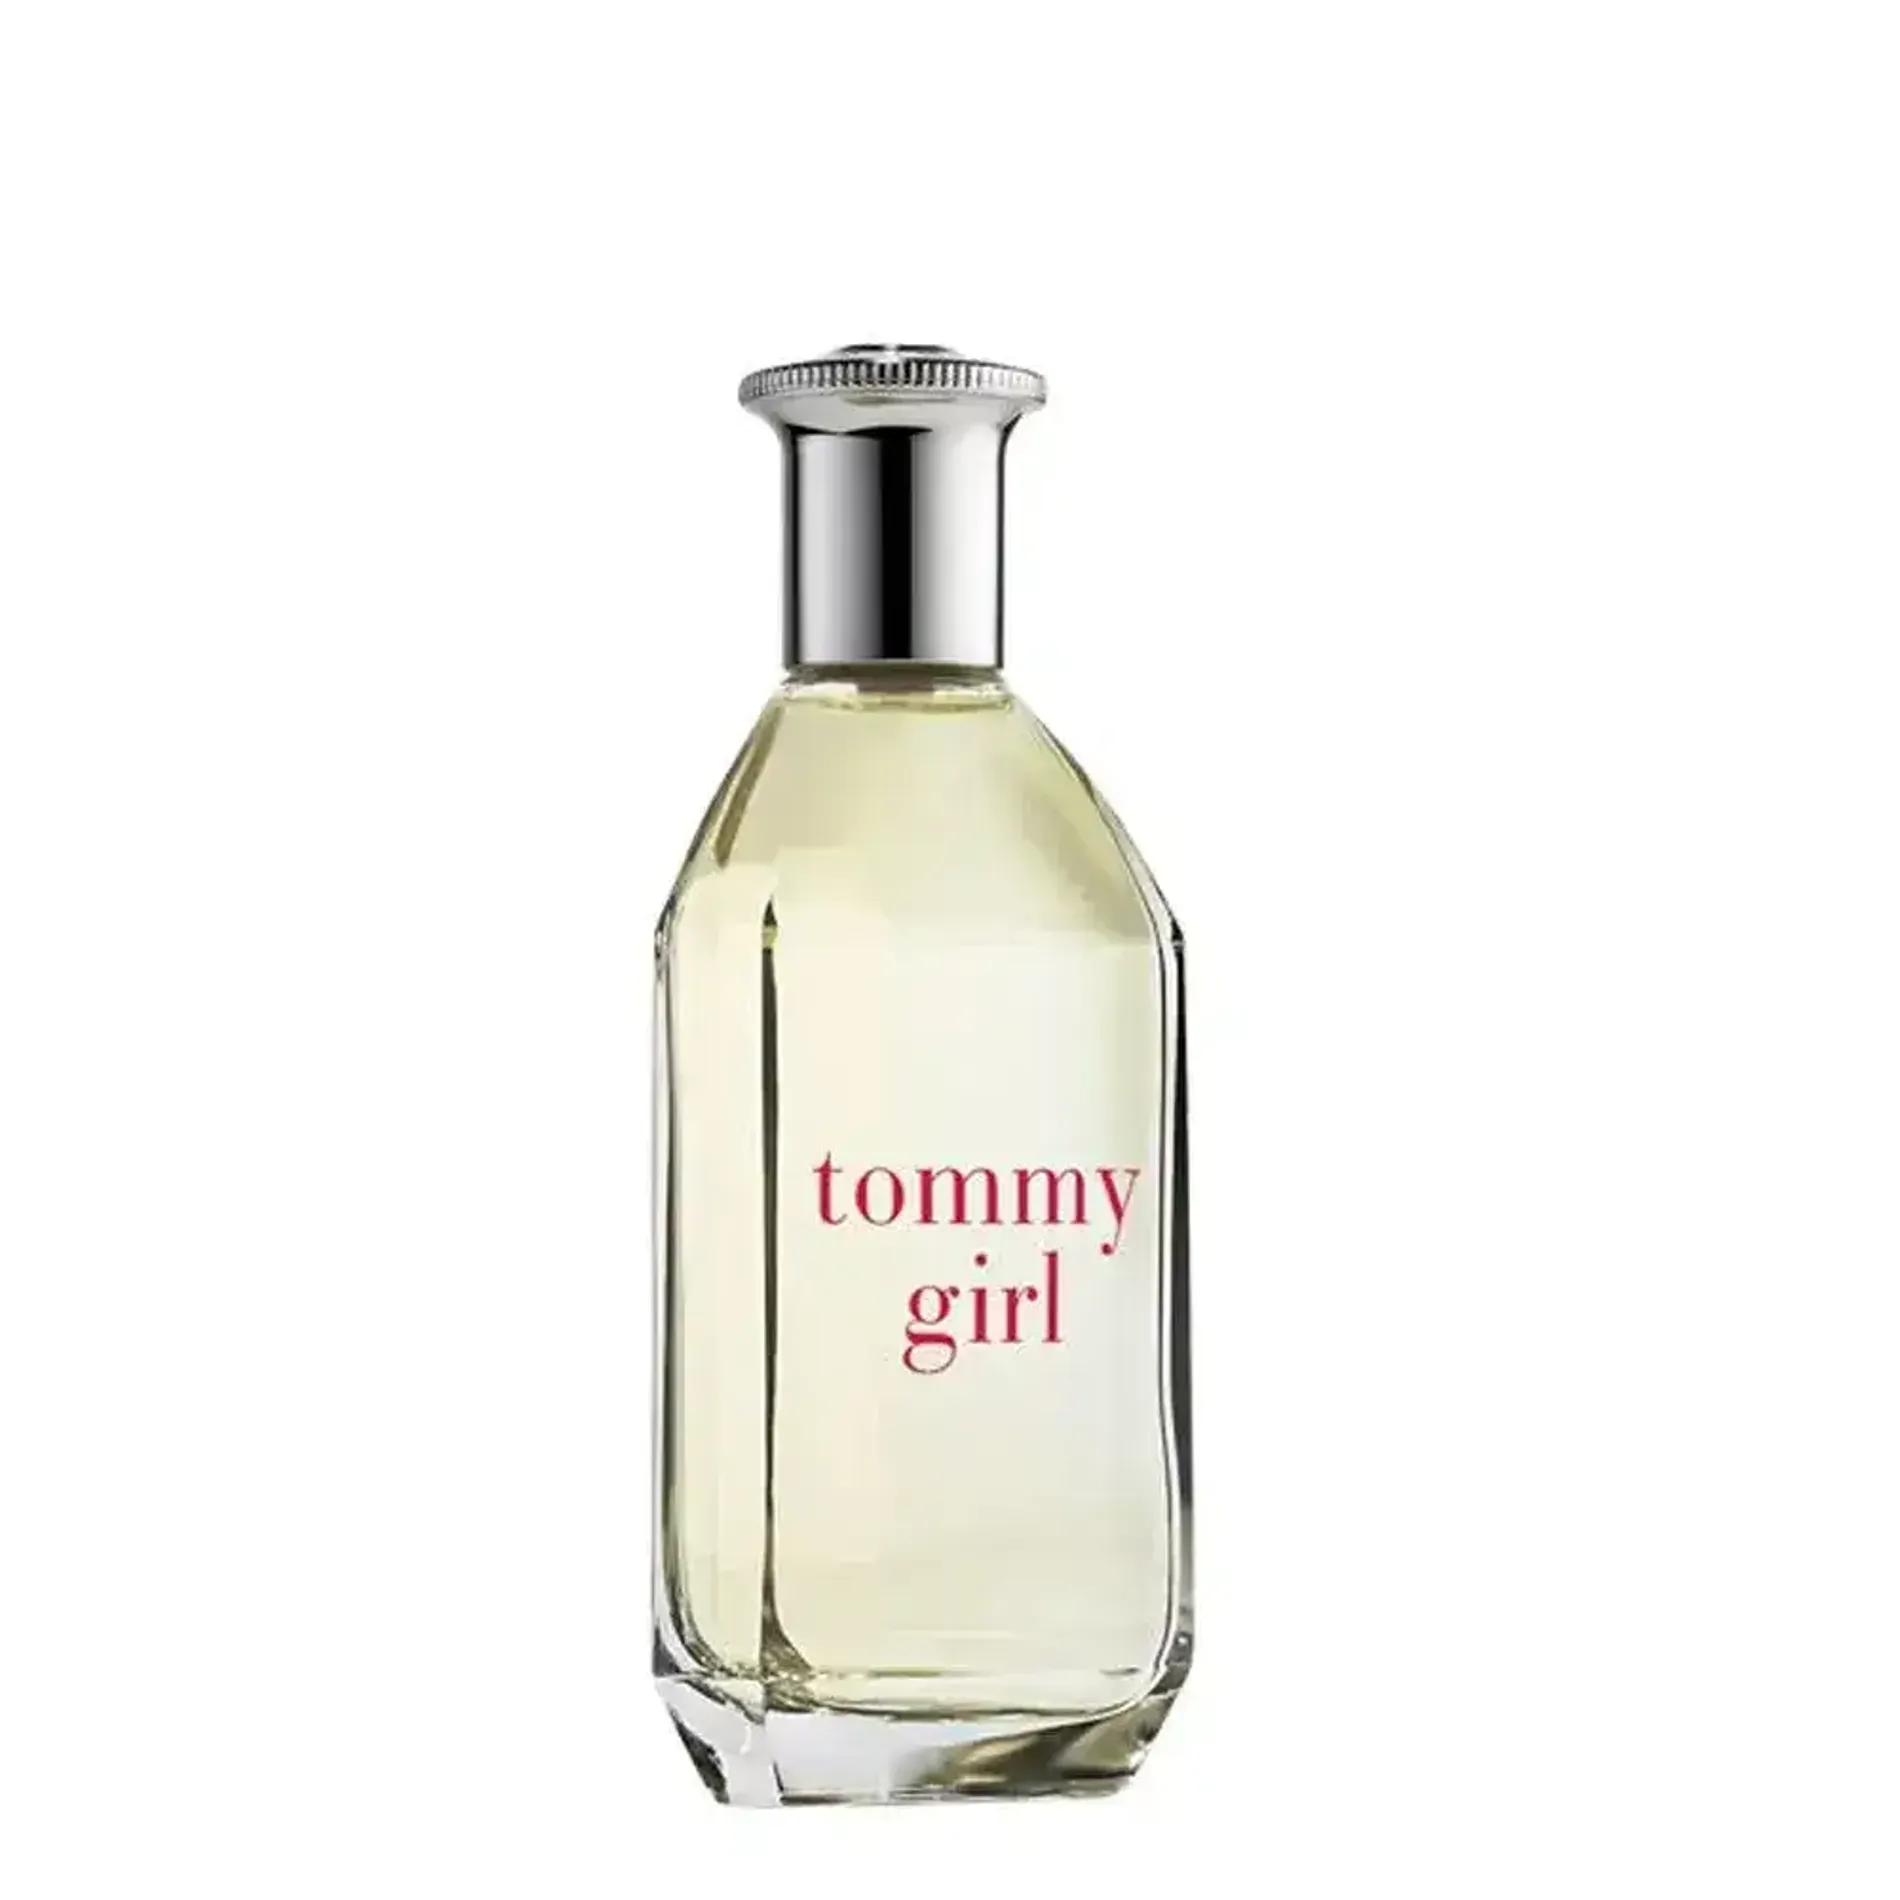 nuoc-hoa-danh-cho-nu-tommy-girl-cologne-spray-edt-50ml-100ml-3